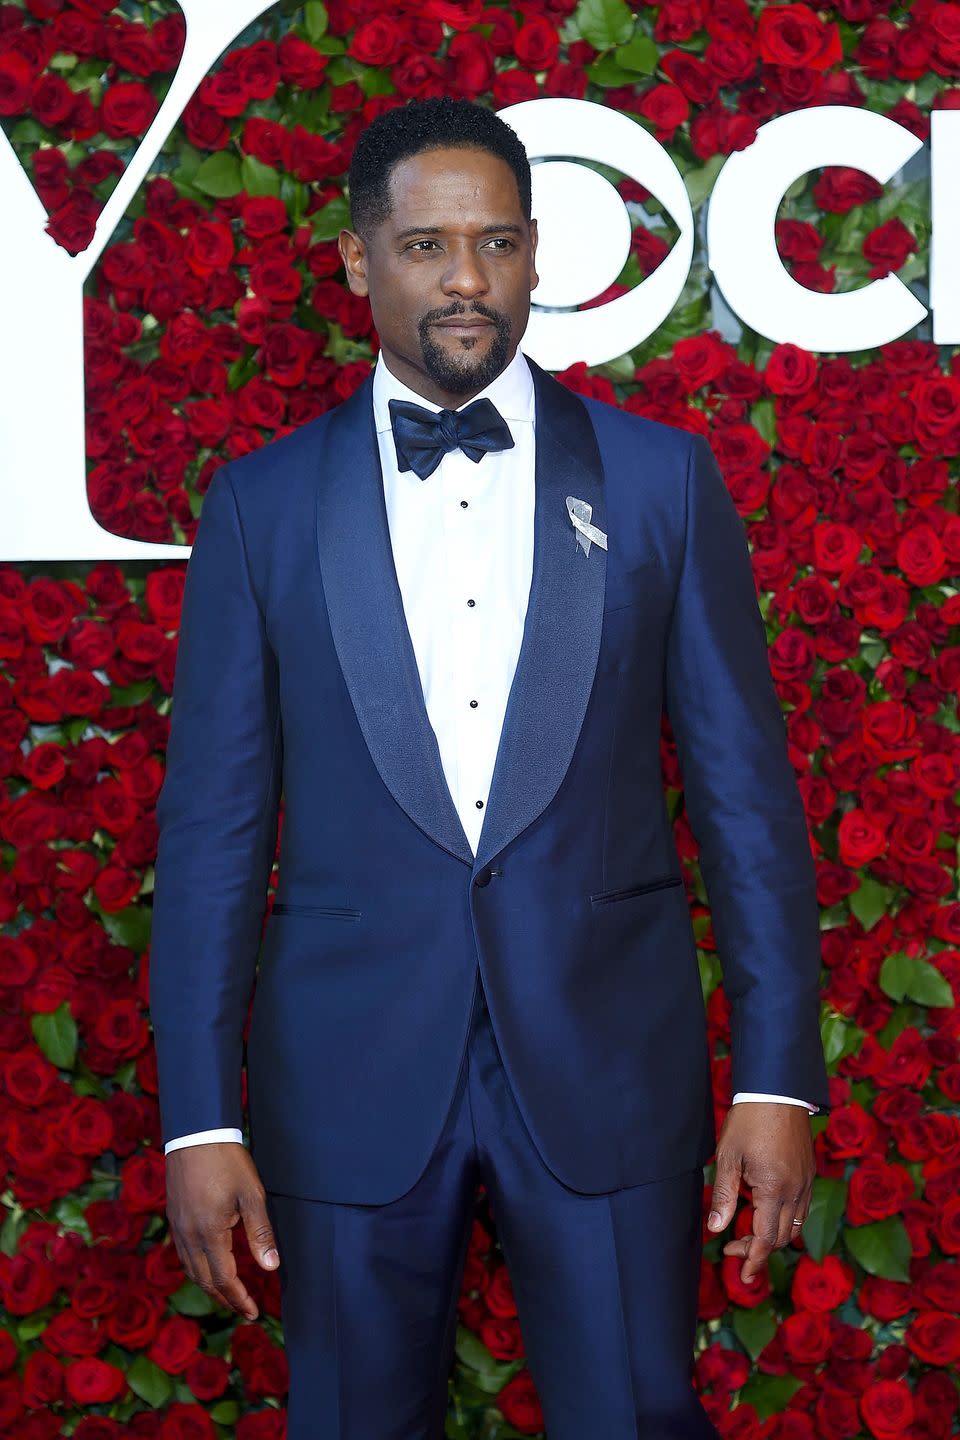 <p>Seemingly immune to aging, Blair is just as good-looking as ever — and rocks some fantastic suits. His career is still strong as well, as he was a part of ABC's hit show <em>Quantico</em> as Owen Hall and Ava DuVernay's Netflix miniseries <em>When They See Us.</em></p>